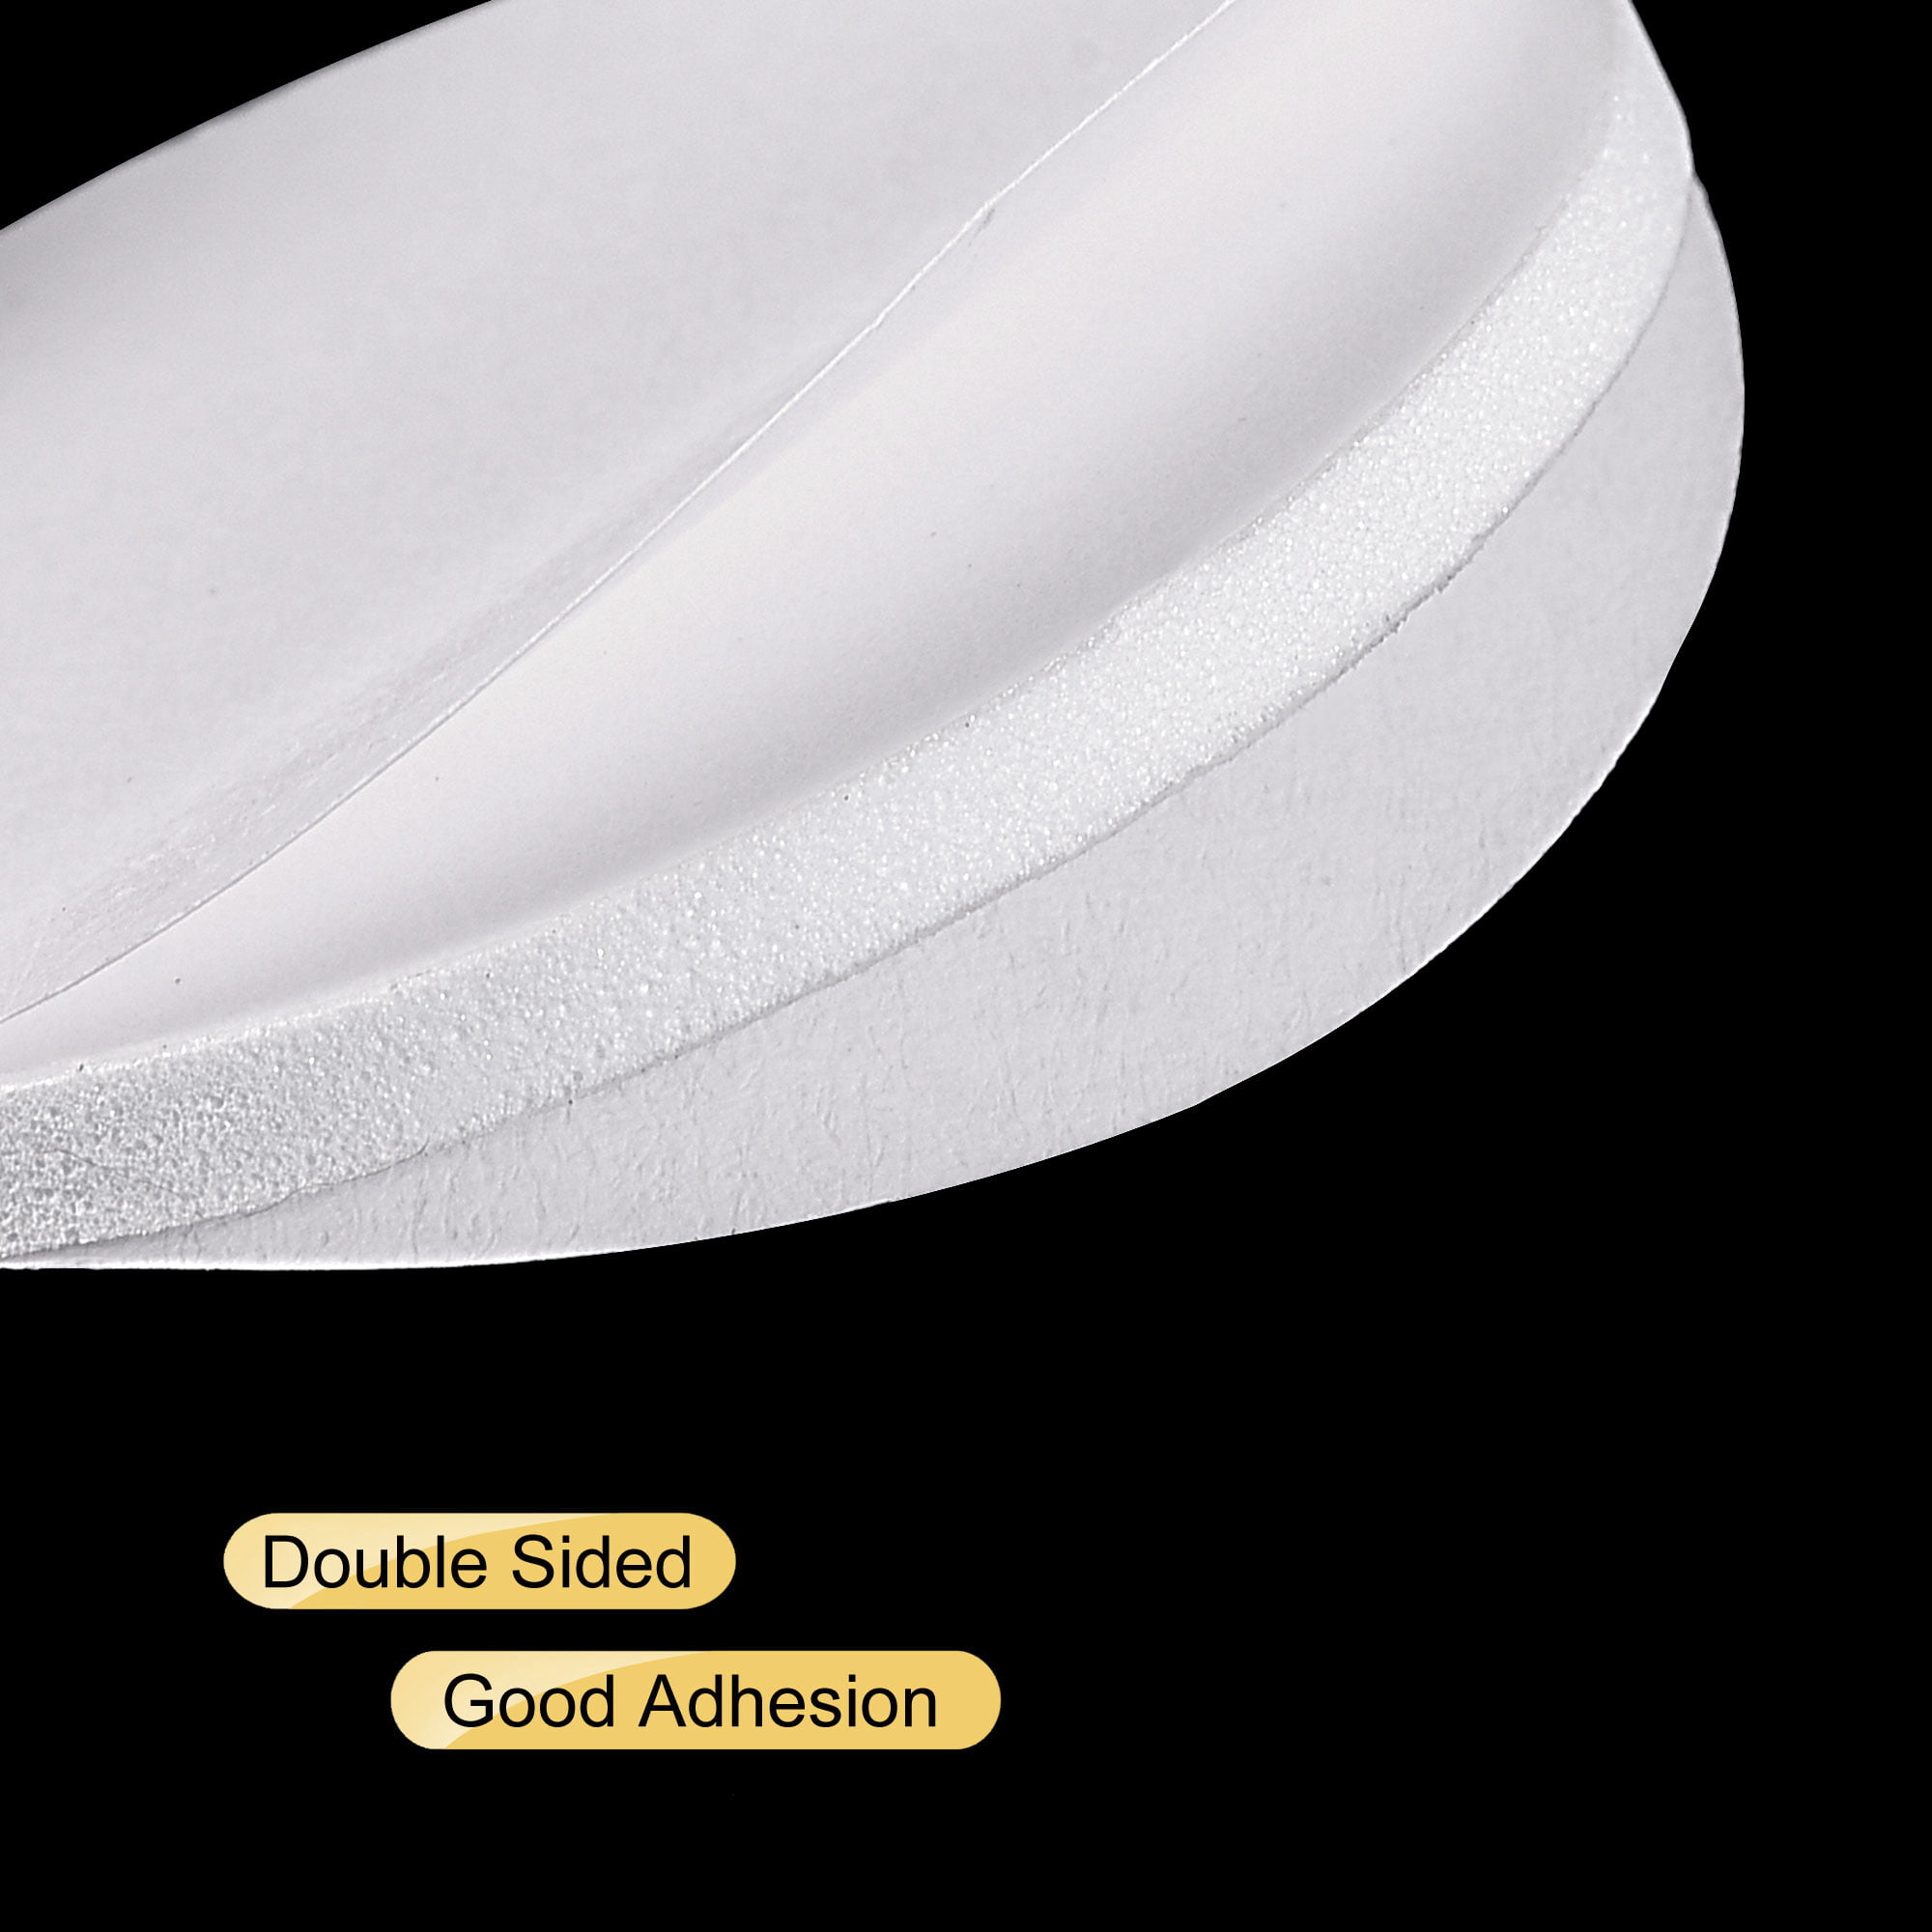 Buy TRU COMPONENTS 1564000 Double sided adhesive pads White (L x W